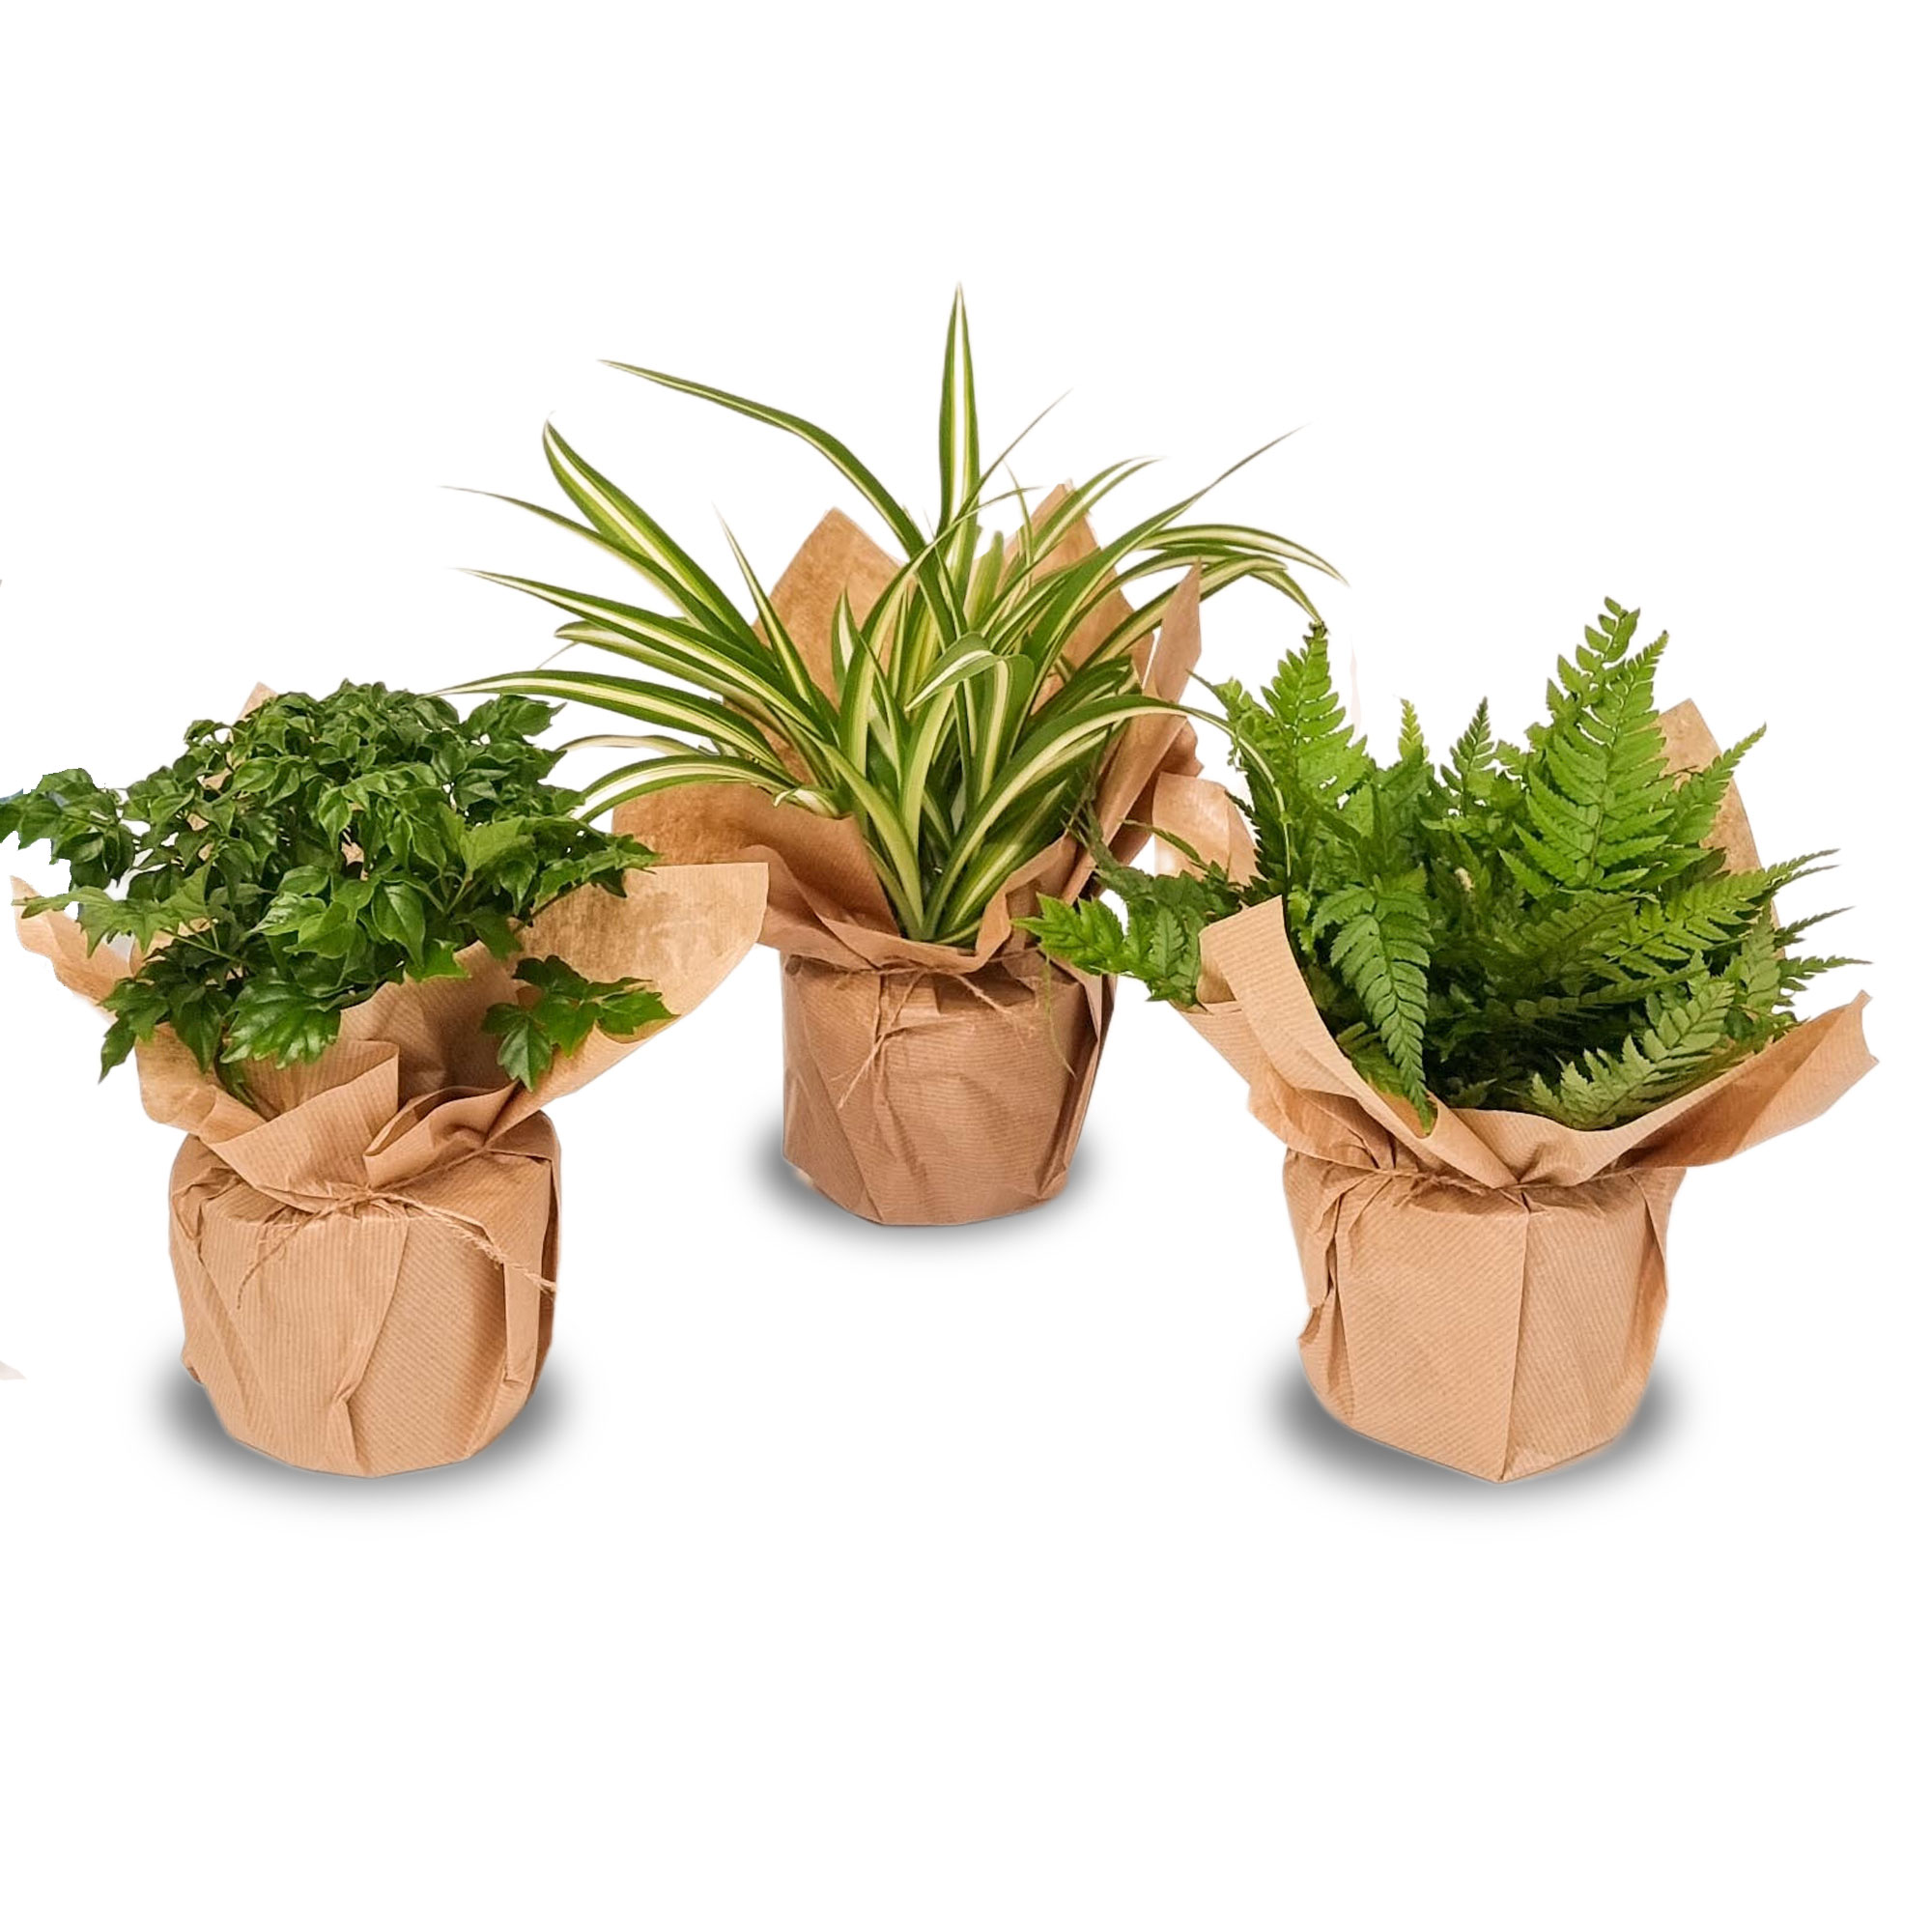 The Beginners Houseplant Bundle - Free Delivery!